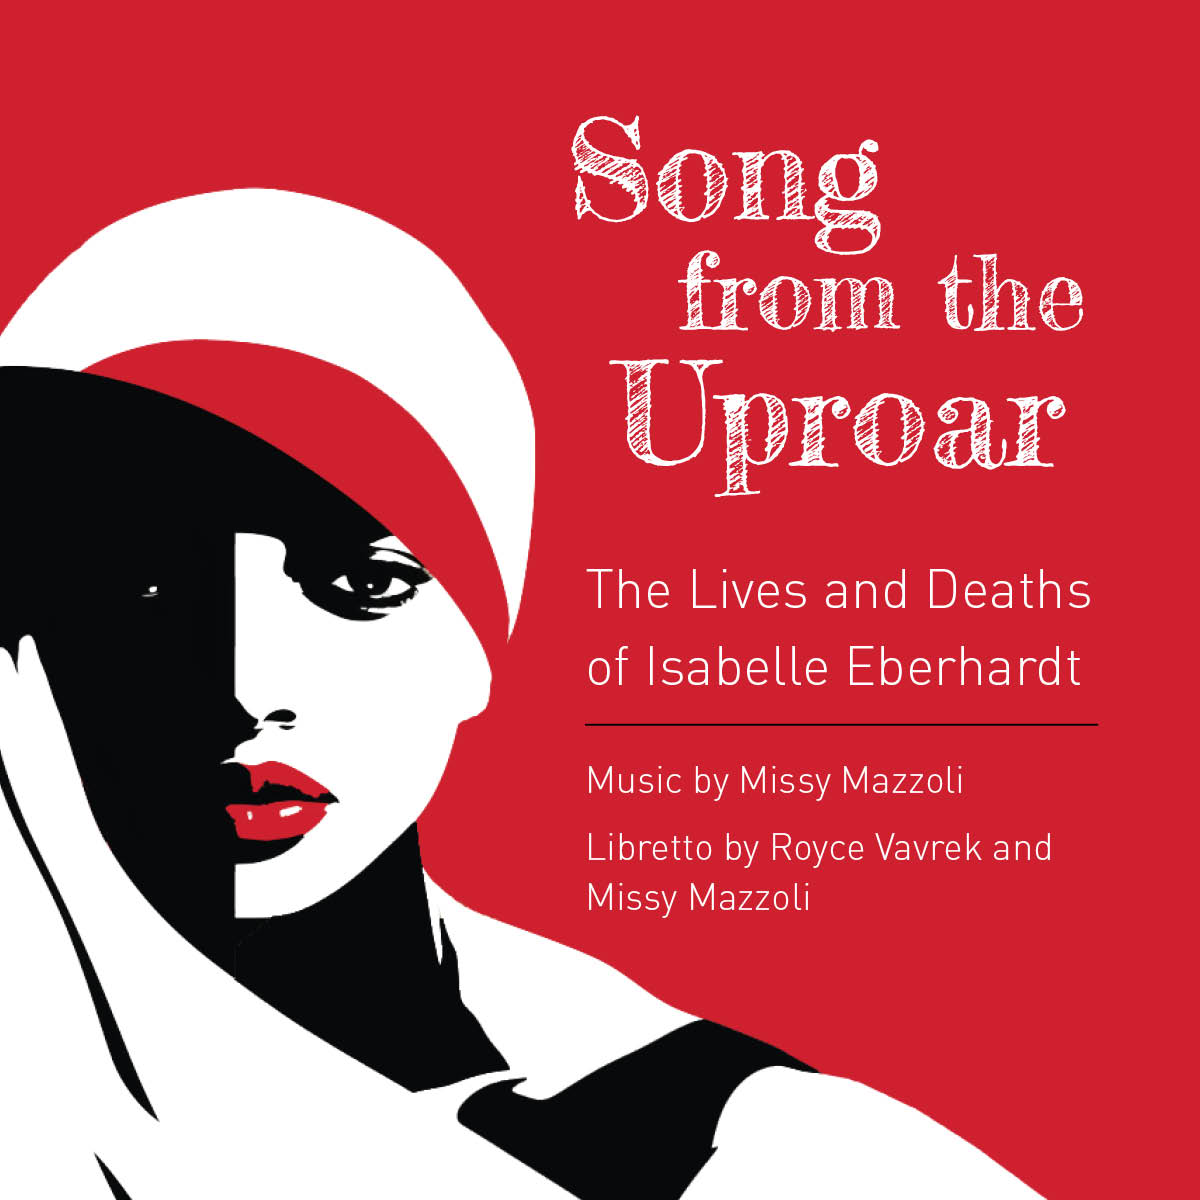 City Opera Vancouver presents Song from the Uproar: The Lives and Deaths of Isabelle Eberhardt, February 29 to March 3, 2024 